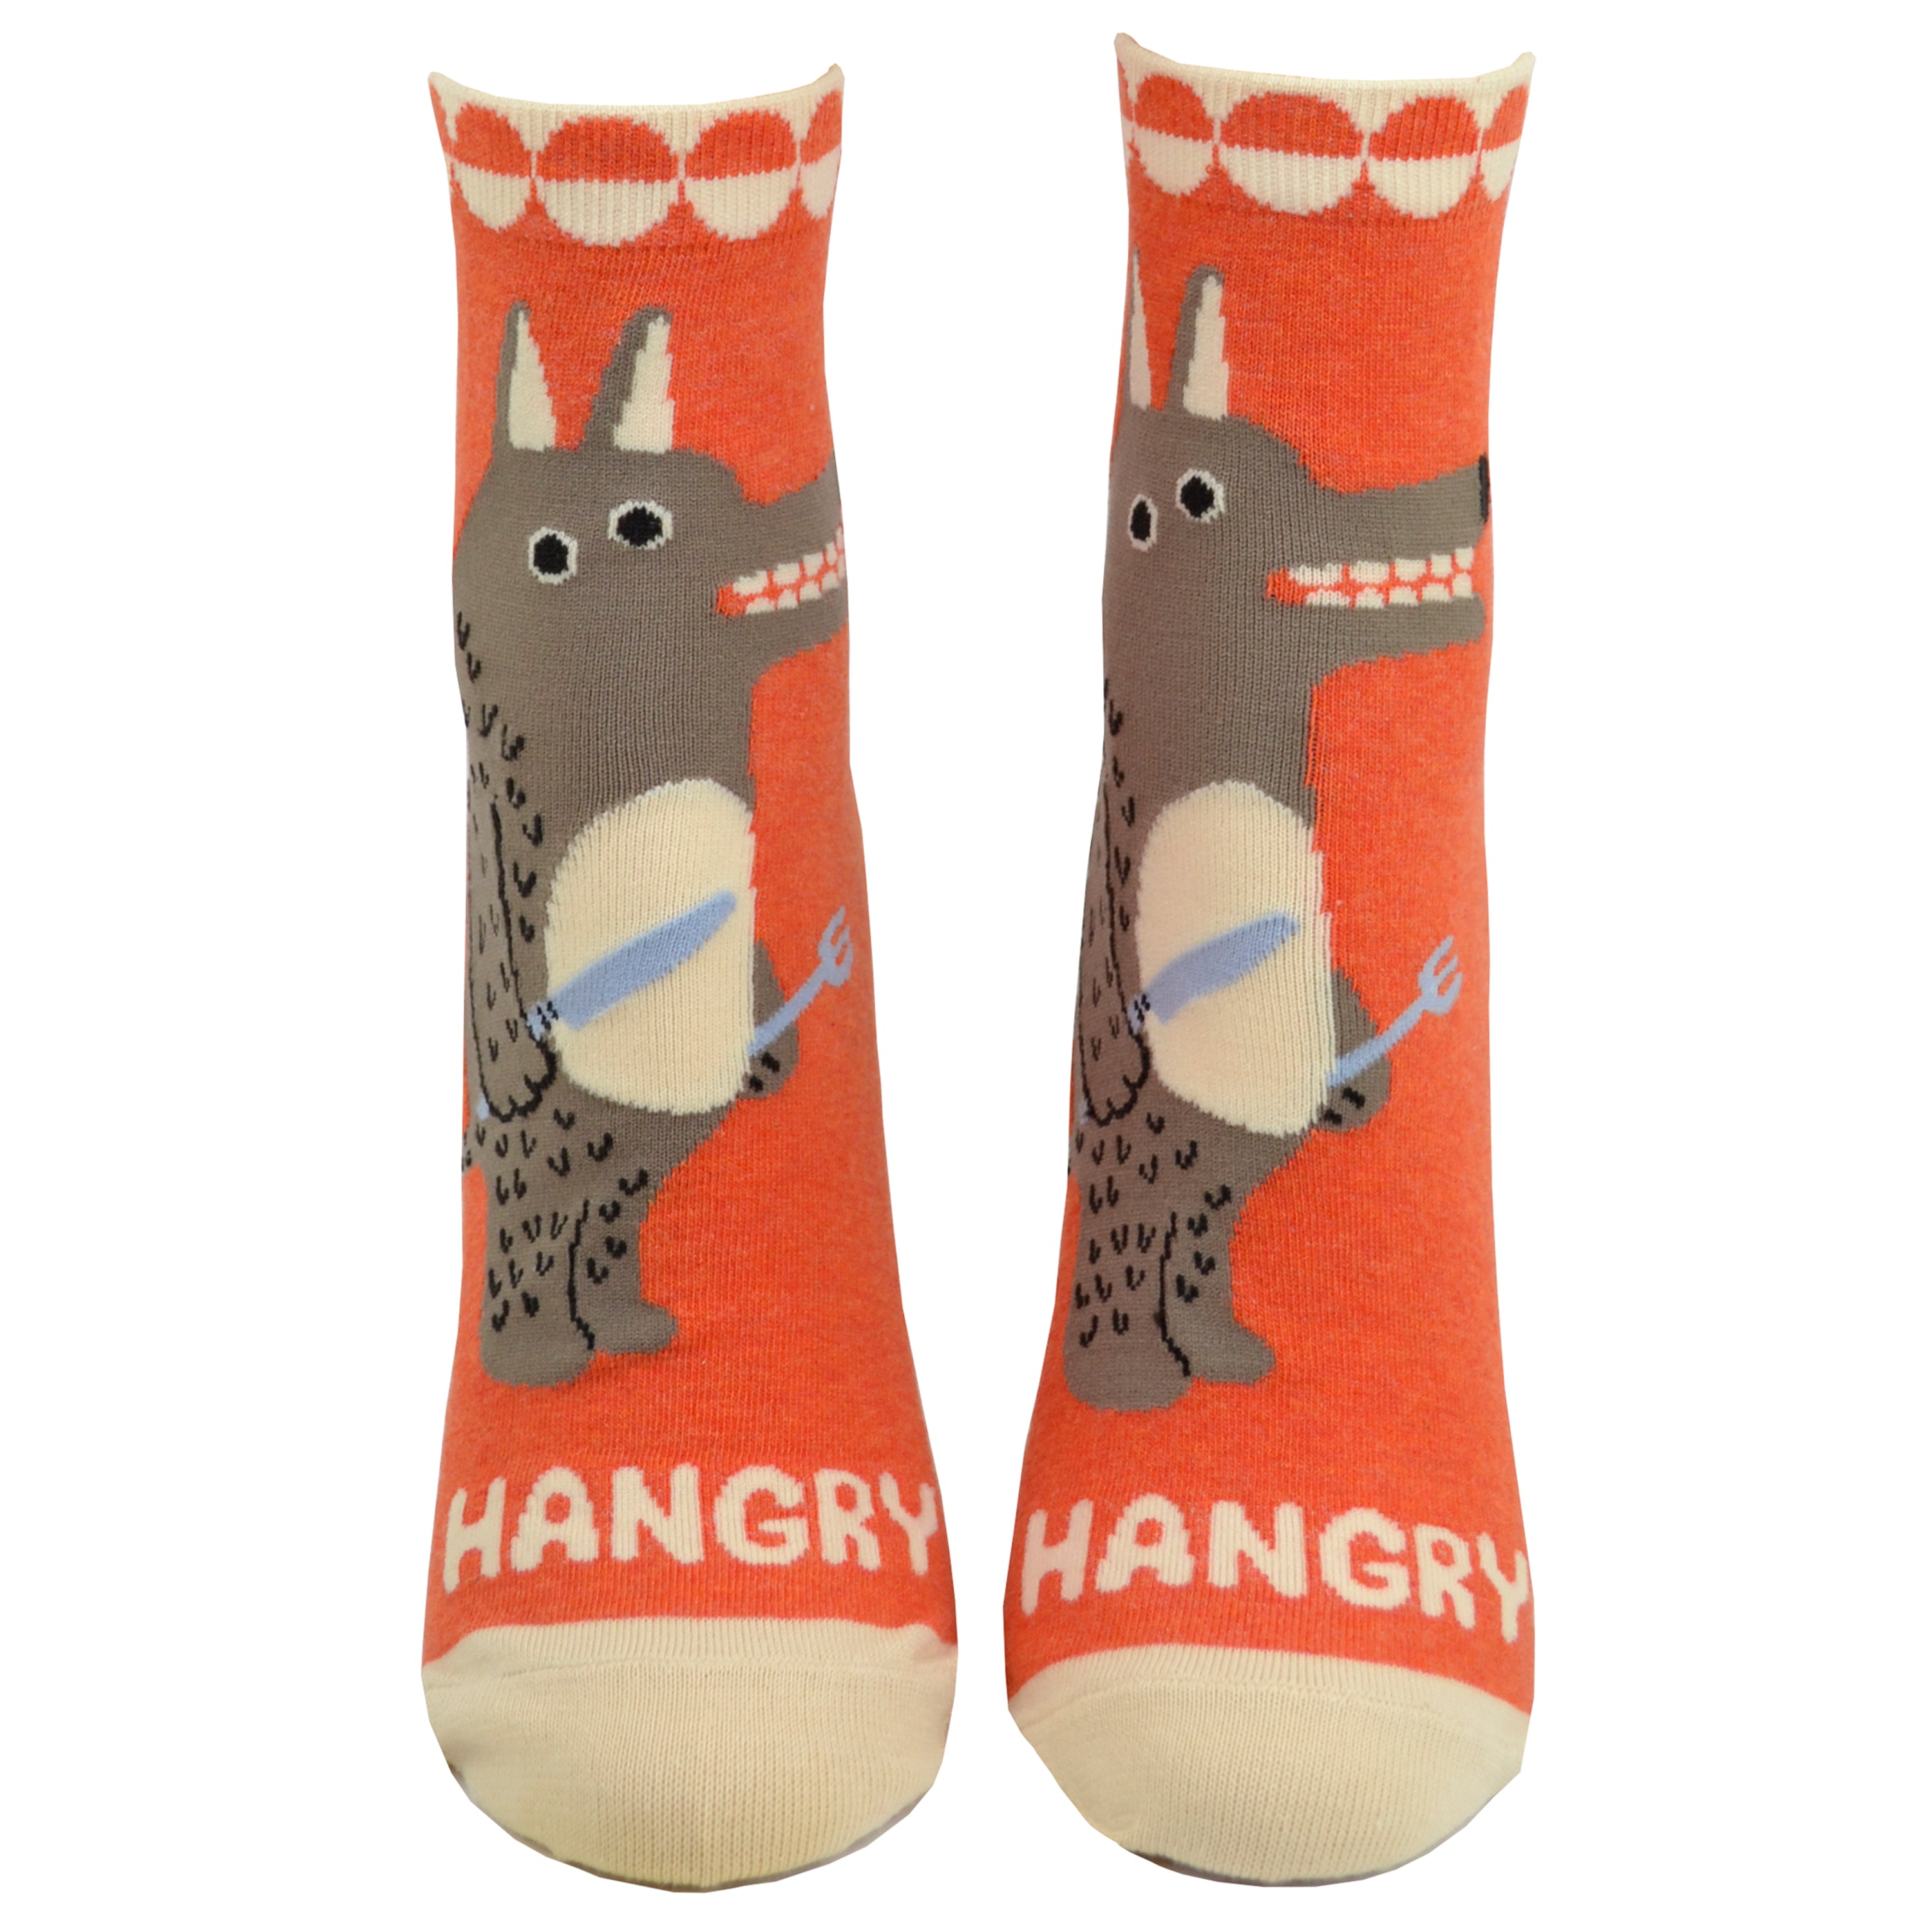 Shown on foot forms from the front, a pair of women's Blue Q cotton ankle socks in orange with a cream heel, toe, and cuff. The front of the socks features a cartoon wolf man with a knife and fork and the word 